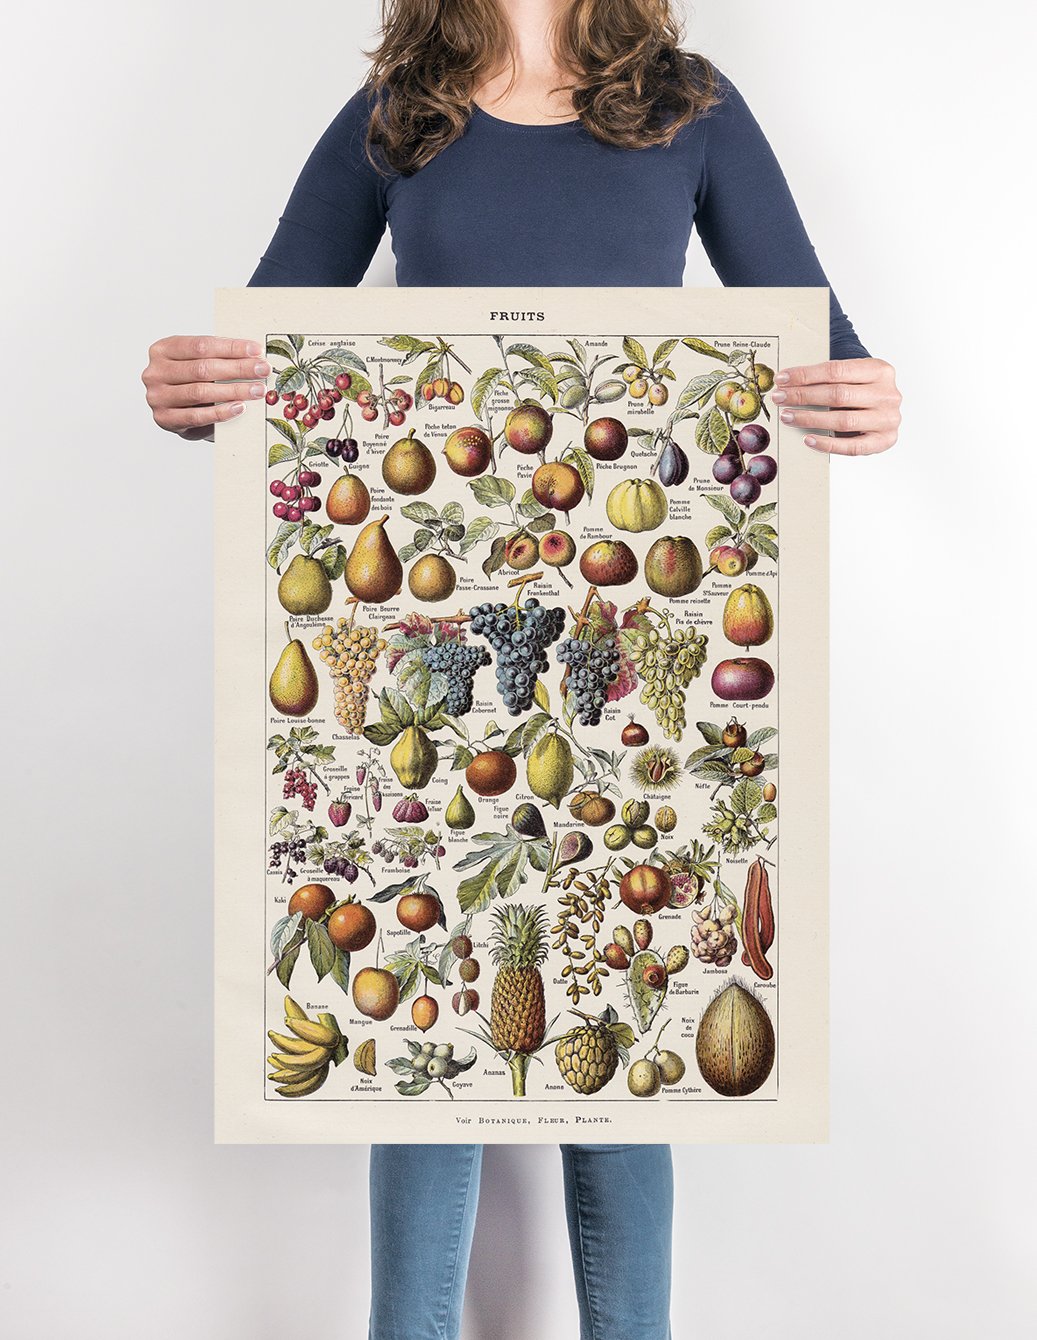 Antique Fruits Chart by Adolphe Millot